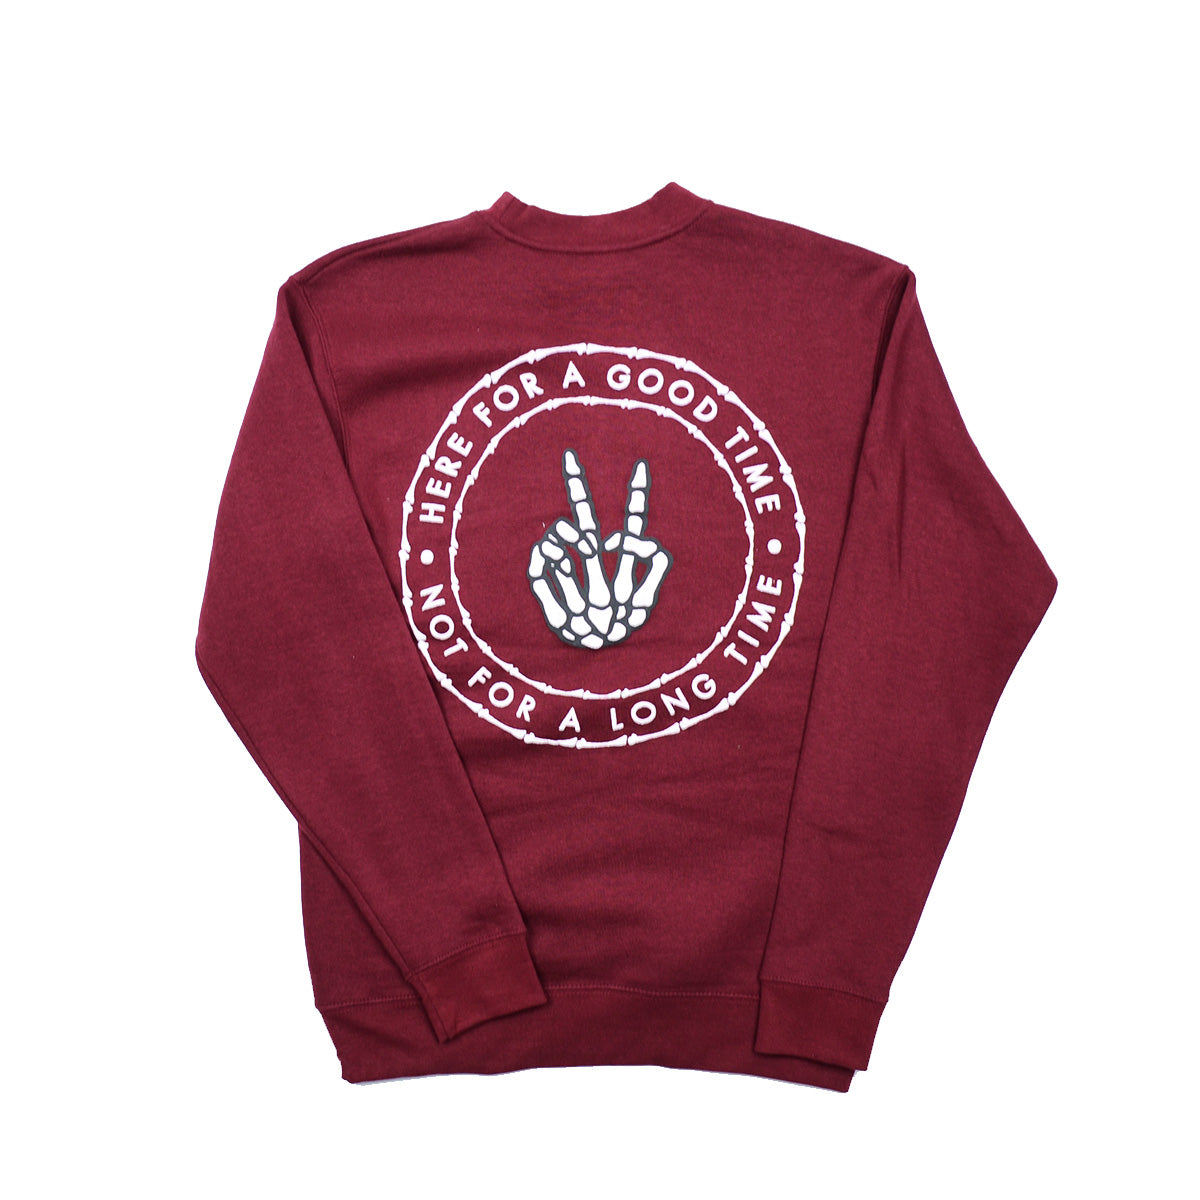 6 Pieces Pack of Burgundy Hoodie''Here for a Good Time'' 1S-2M-2L-1XL